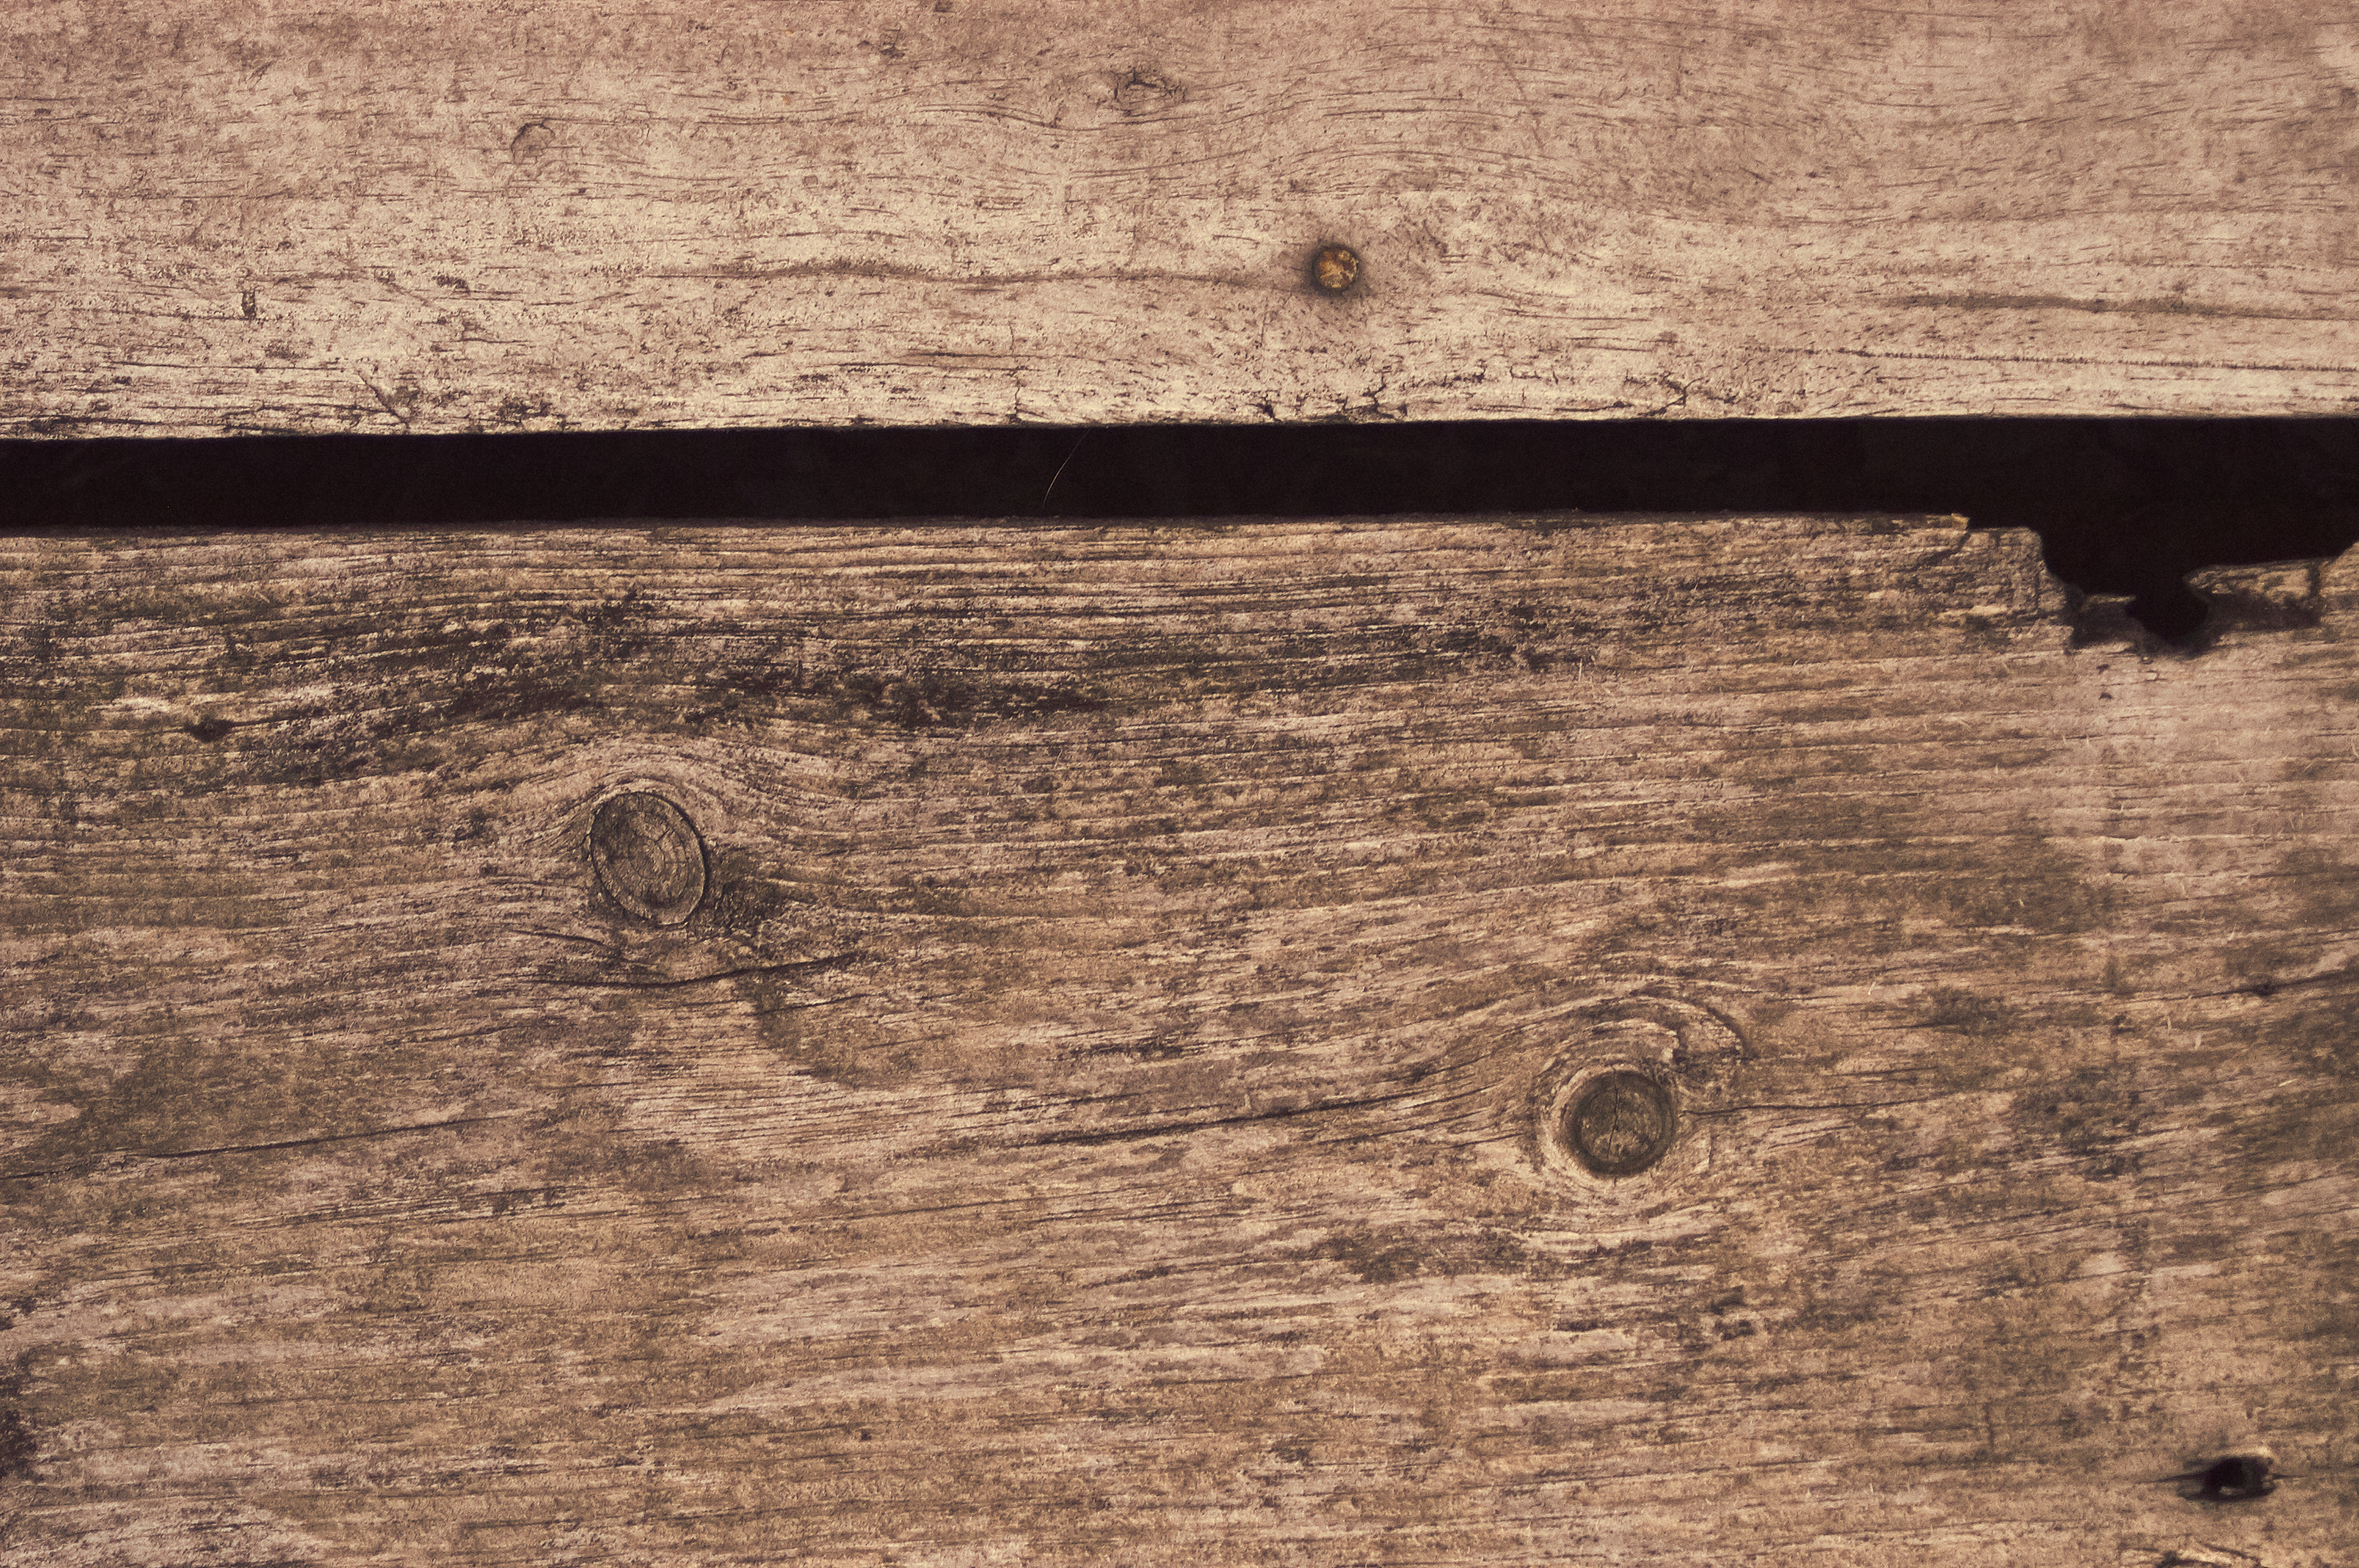 https://negativespace.co/wp-content/uploads/2022/03/negative-space-worn-old-wood-texture.jpg